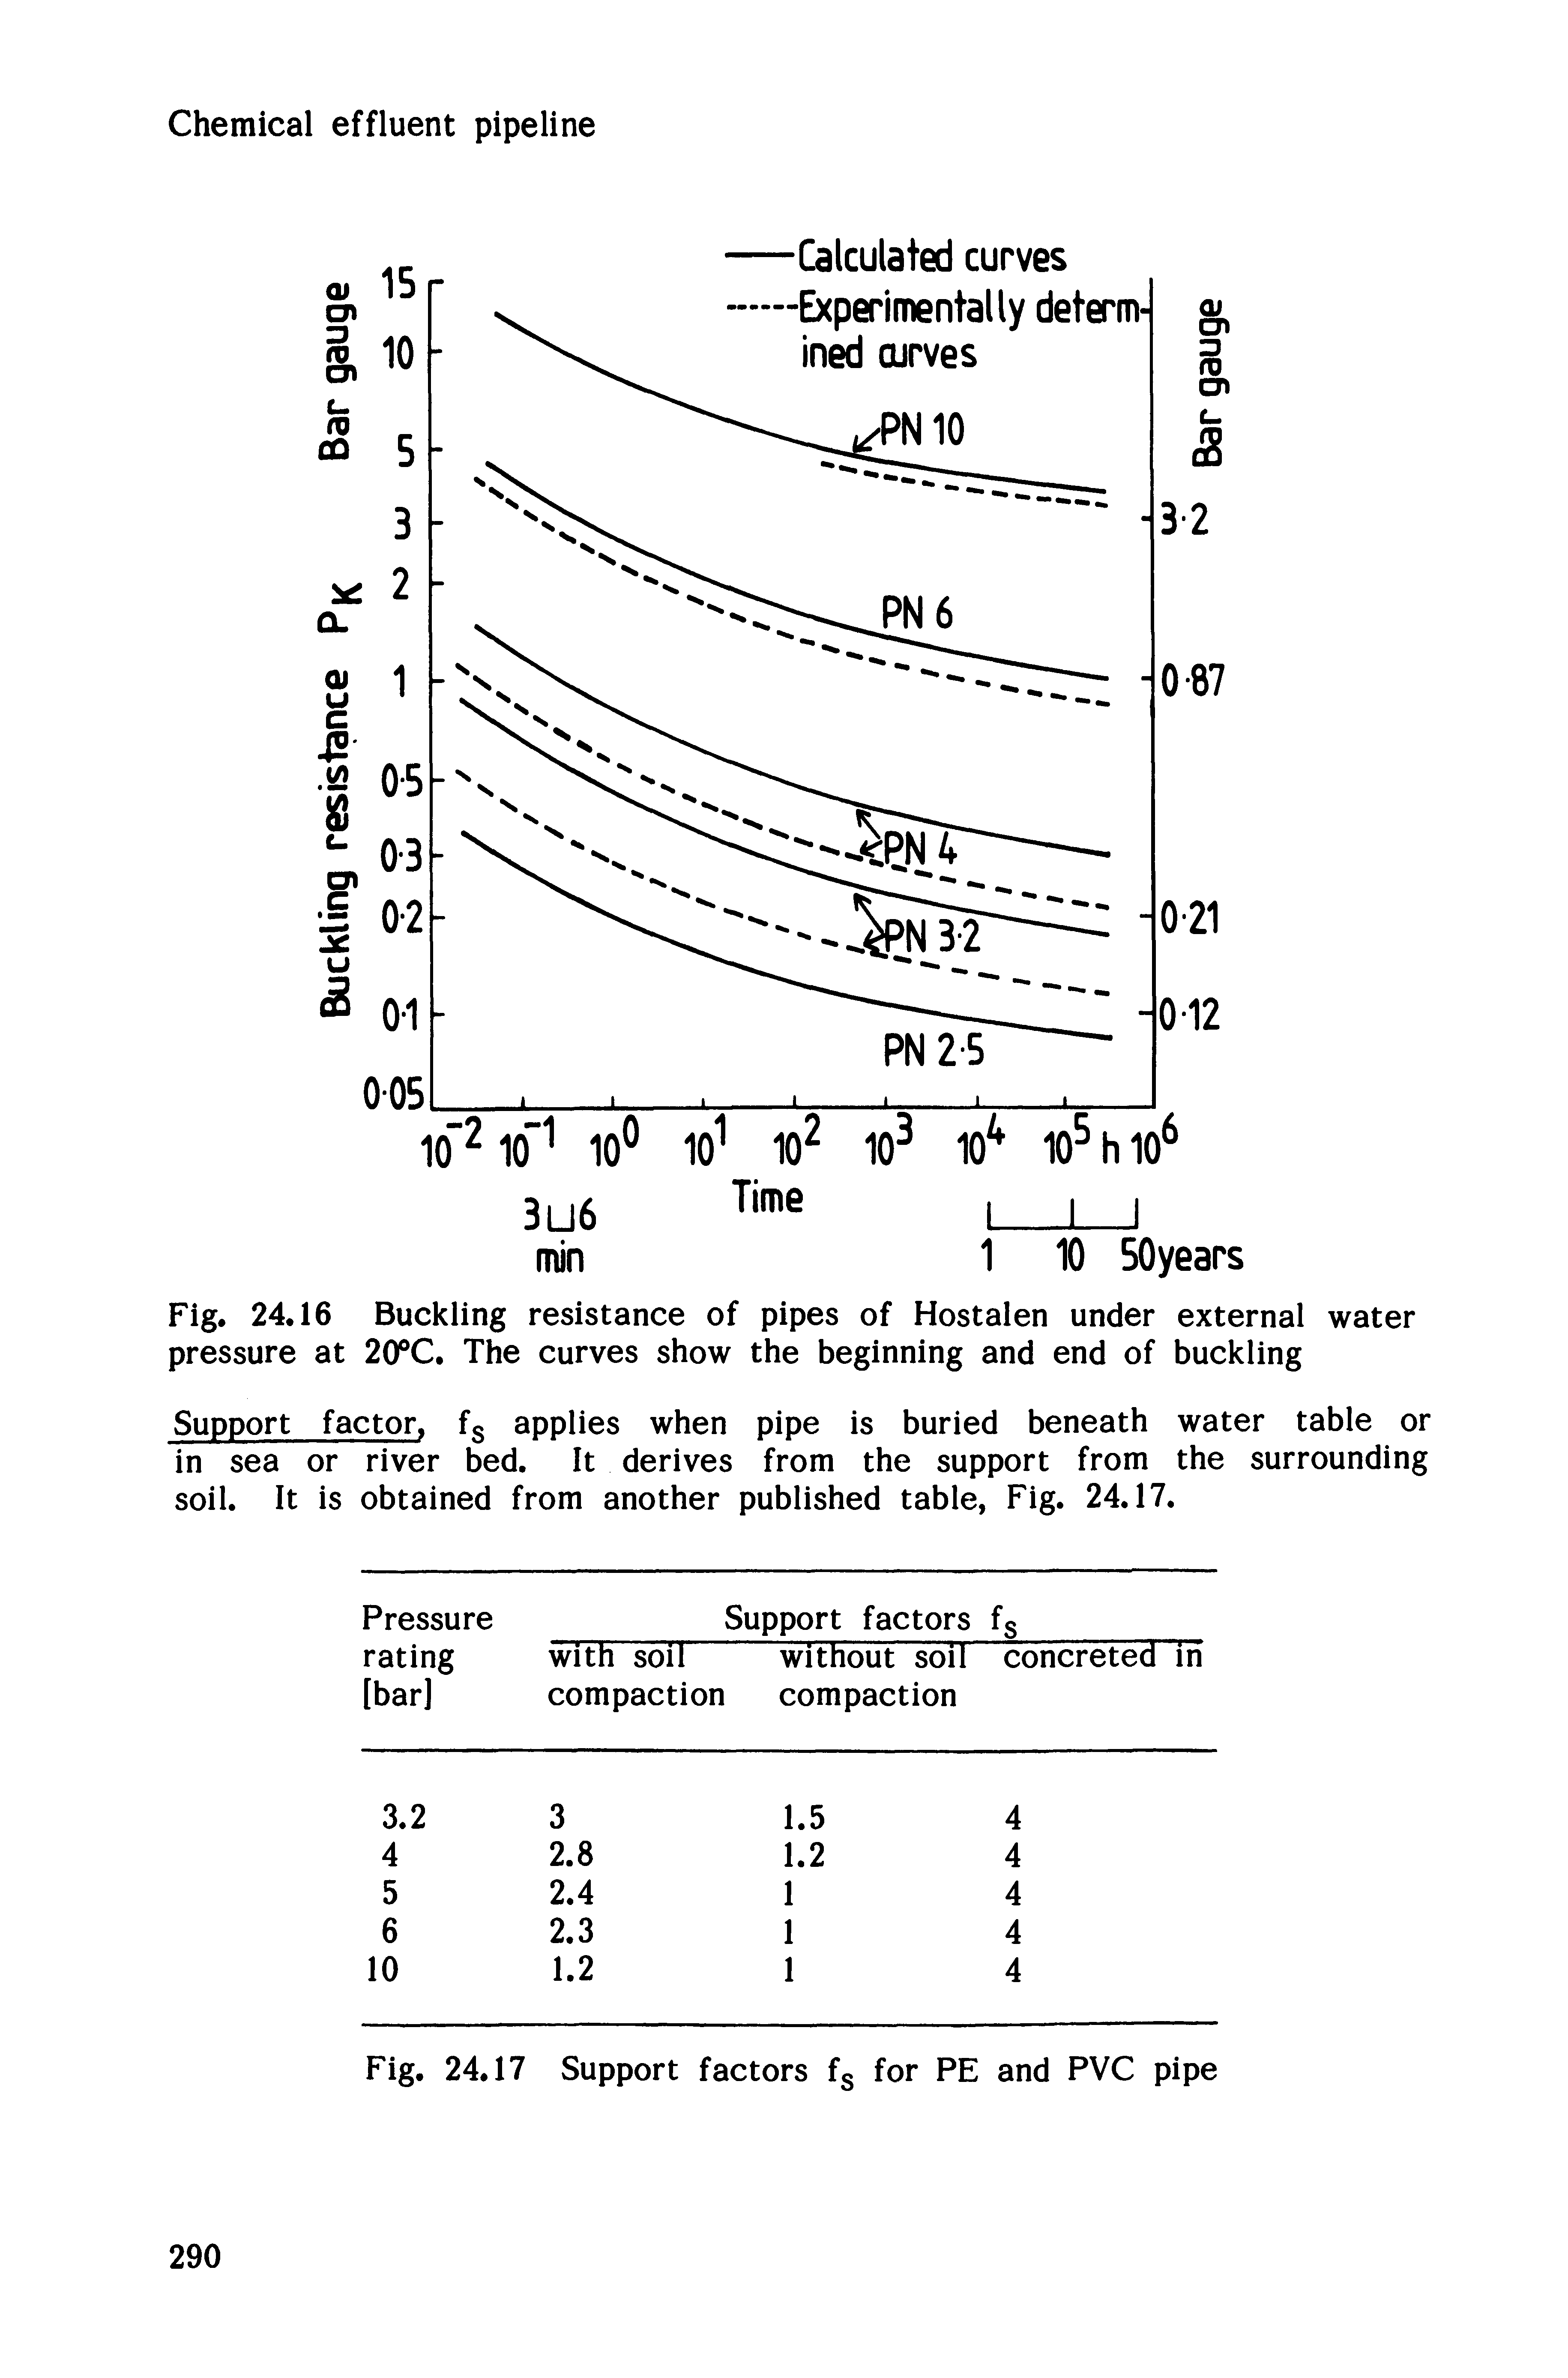 Fig. 24.16 Buckling resistance of pipes of Hostalen under external water pressure at 20 C. The curves show the beginning and end of buckling...